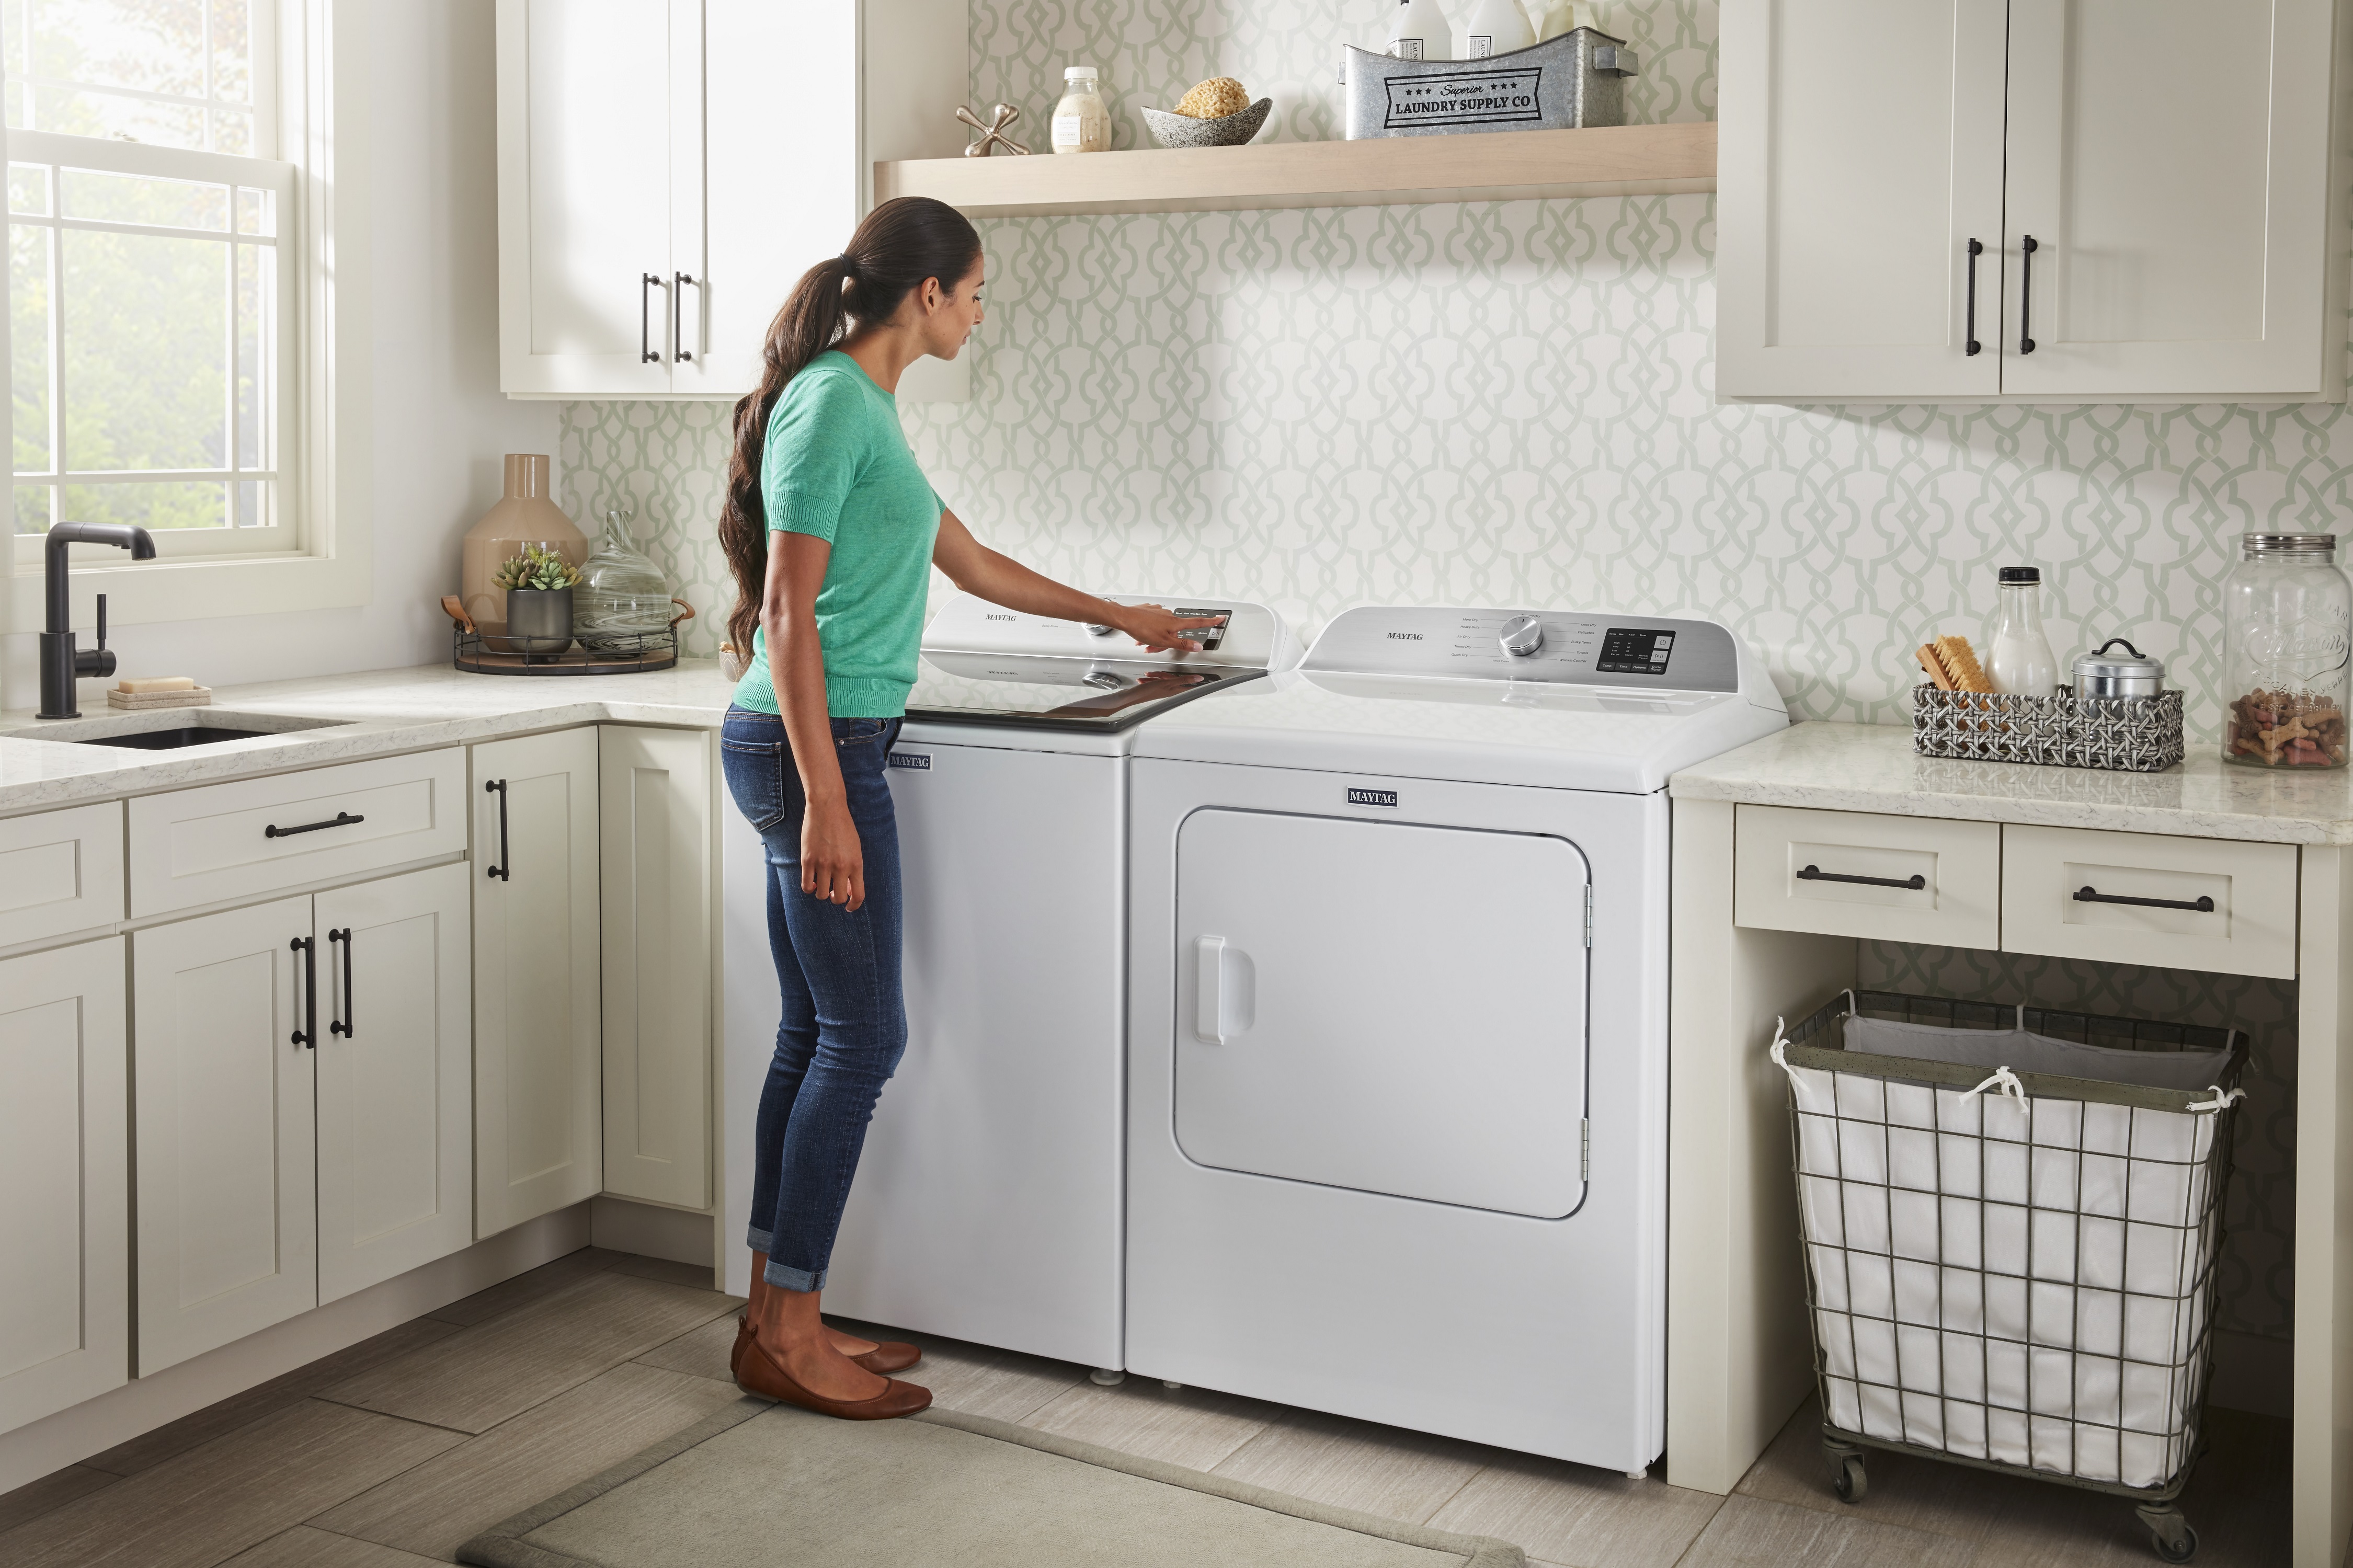 Whirlpool Top Load HE Washer: Get a Better Clean with Less